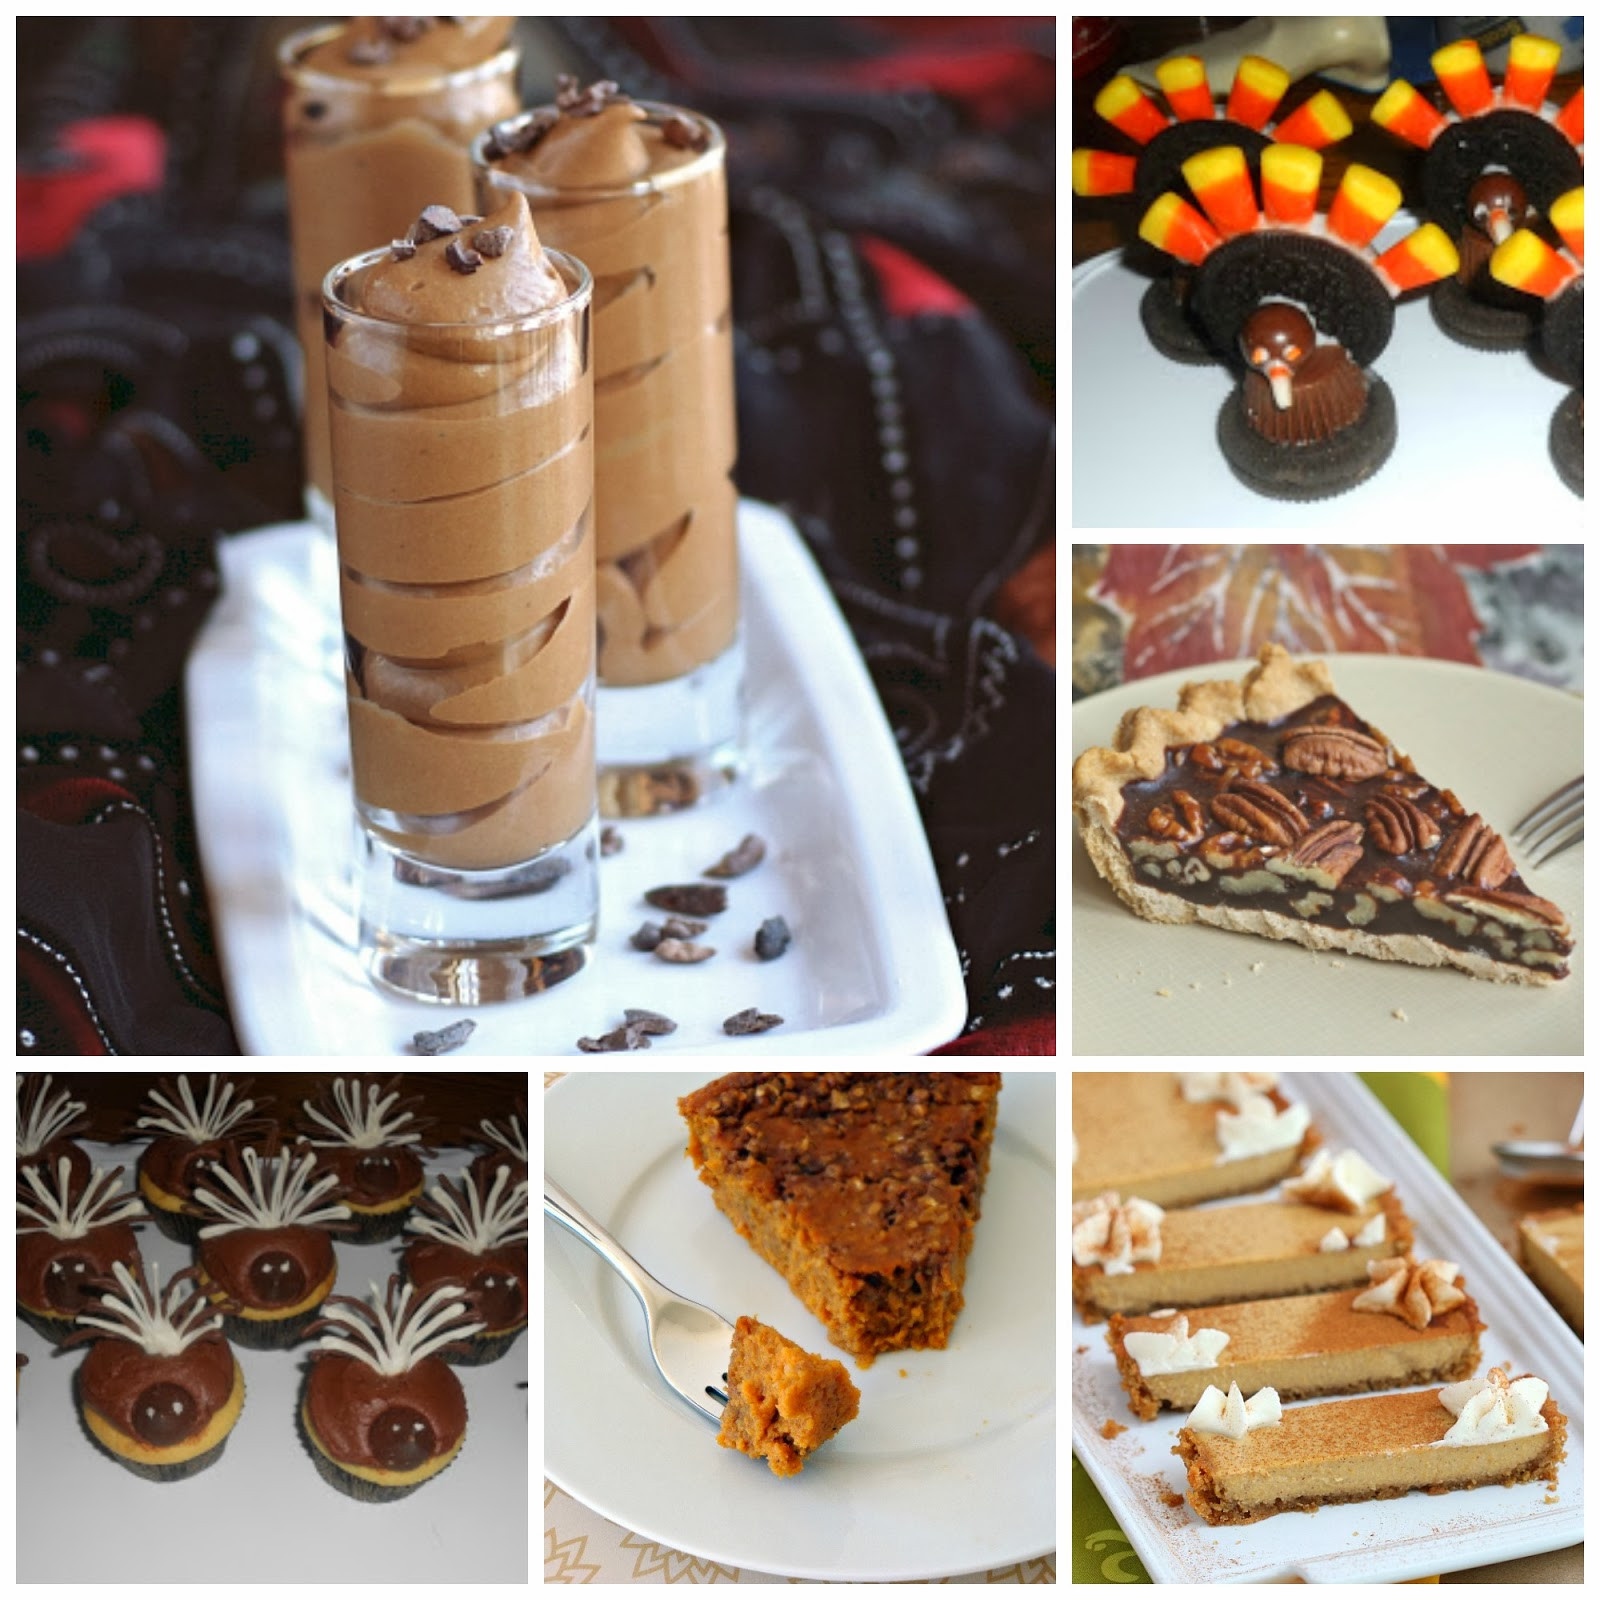 Thanksgiving Turkey Desserts
 75 Recipes for Thanksgiving Hezzi D s Books and Cooks